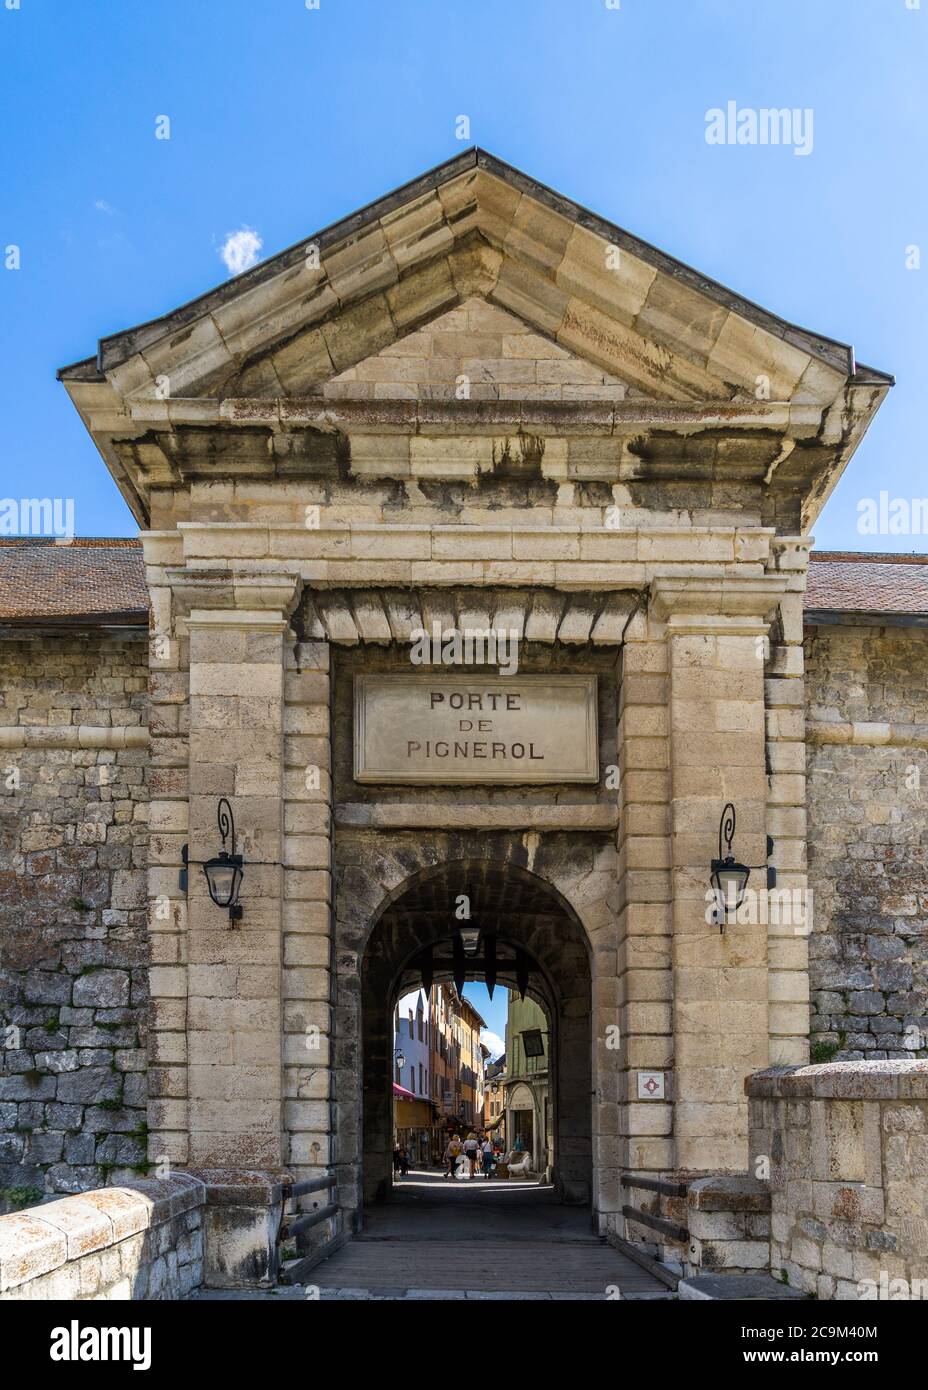 Pignerol gate at the entrance of Briancon, a famous fortified town built by Vauban and UNESCO World Heritage. Briancon, France, July 2020 Stock Photo